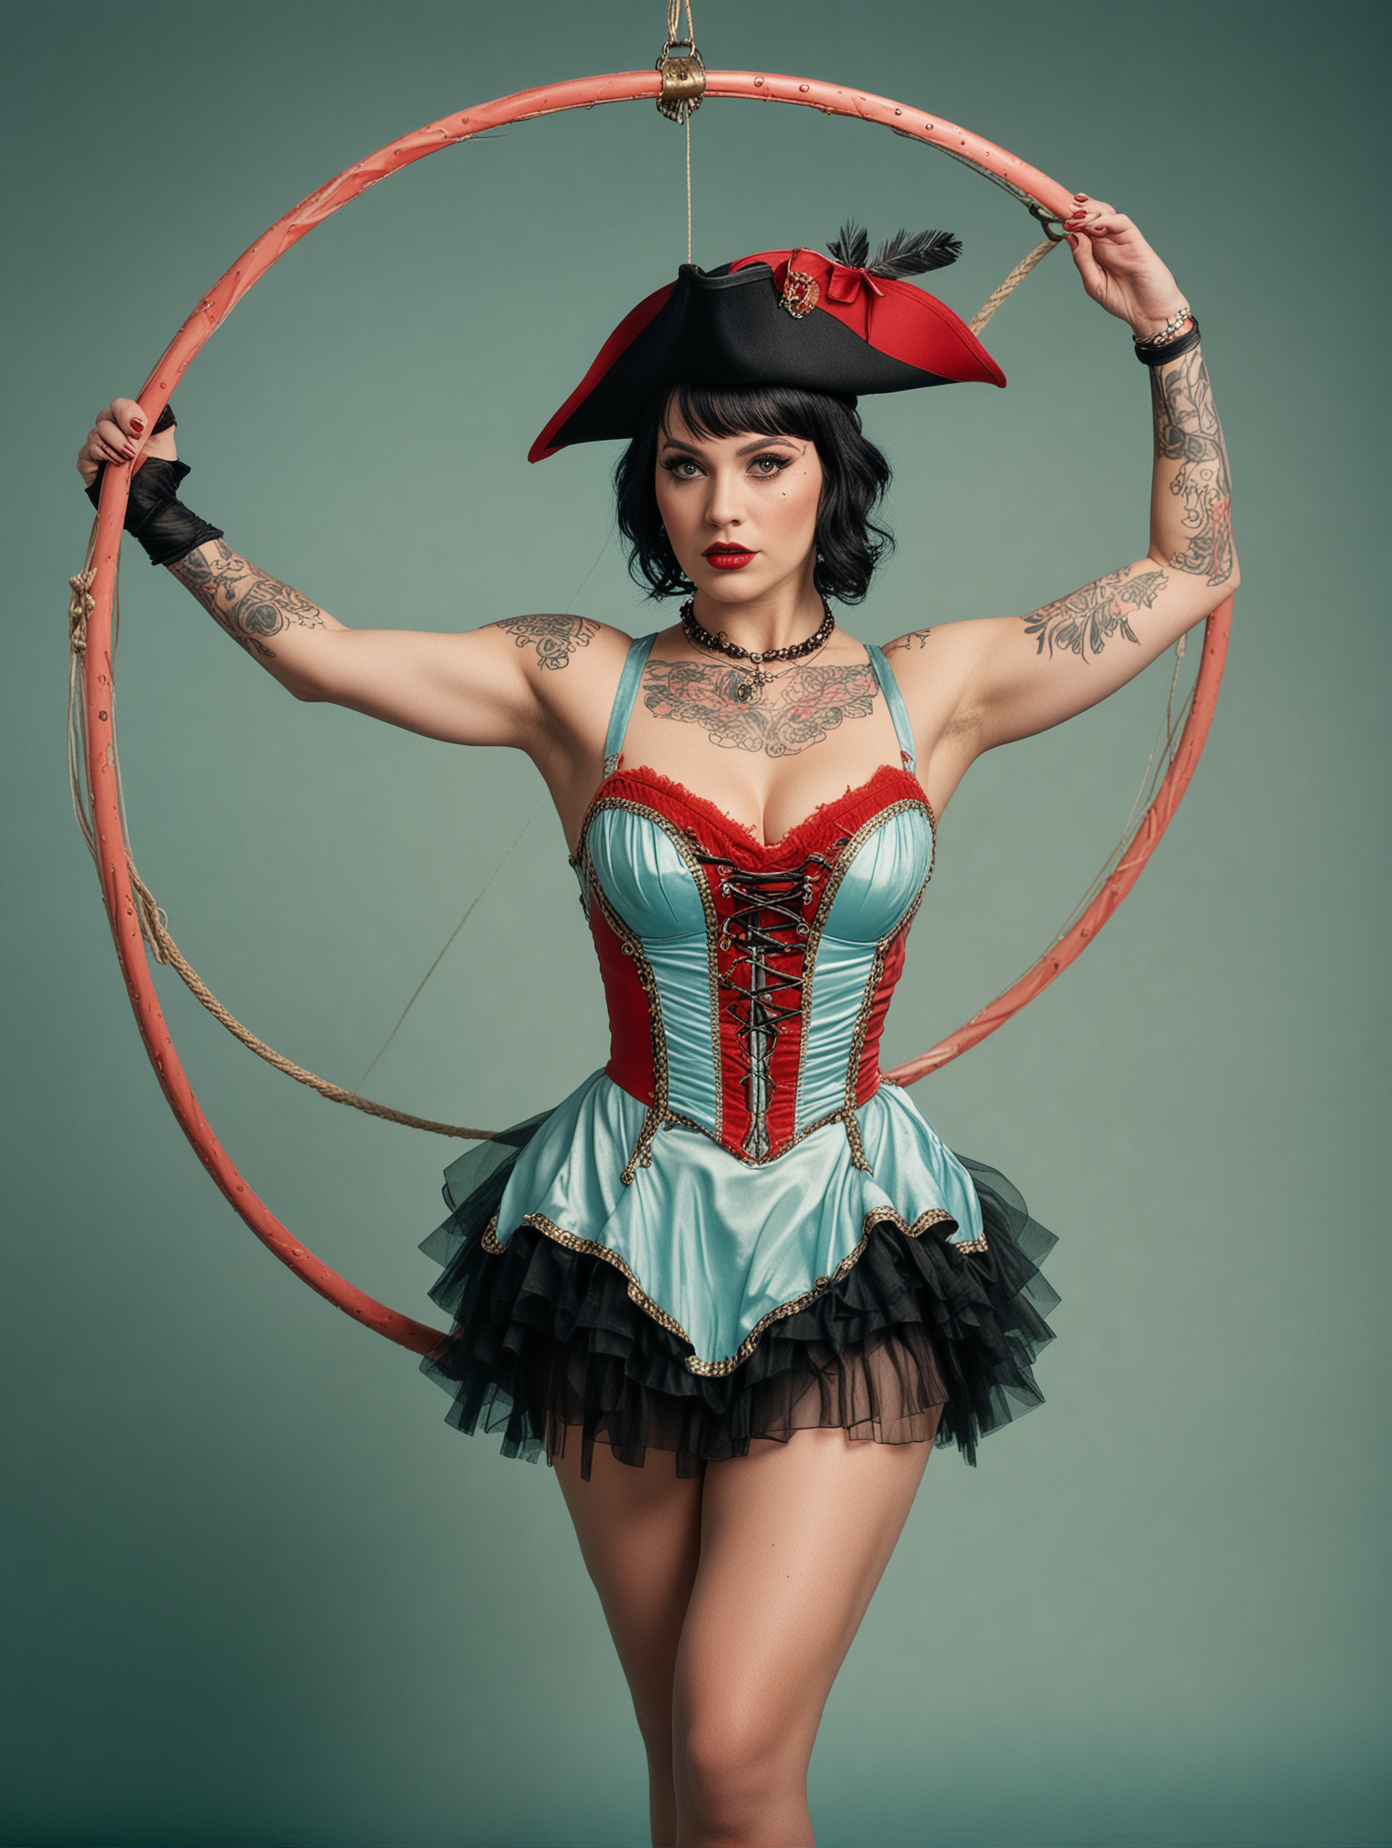 circus, in the style of whimsical yet eerie symbolism, American 1920's circus, light cyan and red palette, close up portraiture, well built busty female acrobat with black hair, wearing a pirate themed outfit, pirate hat, leotard and tutu, covered in tatoos, holding an aerial hoop, nature-inspired pieces, circus costumes, ultra details